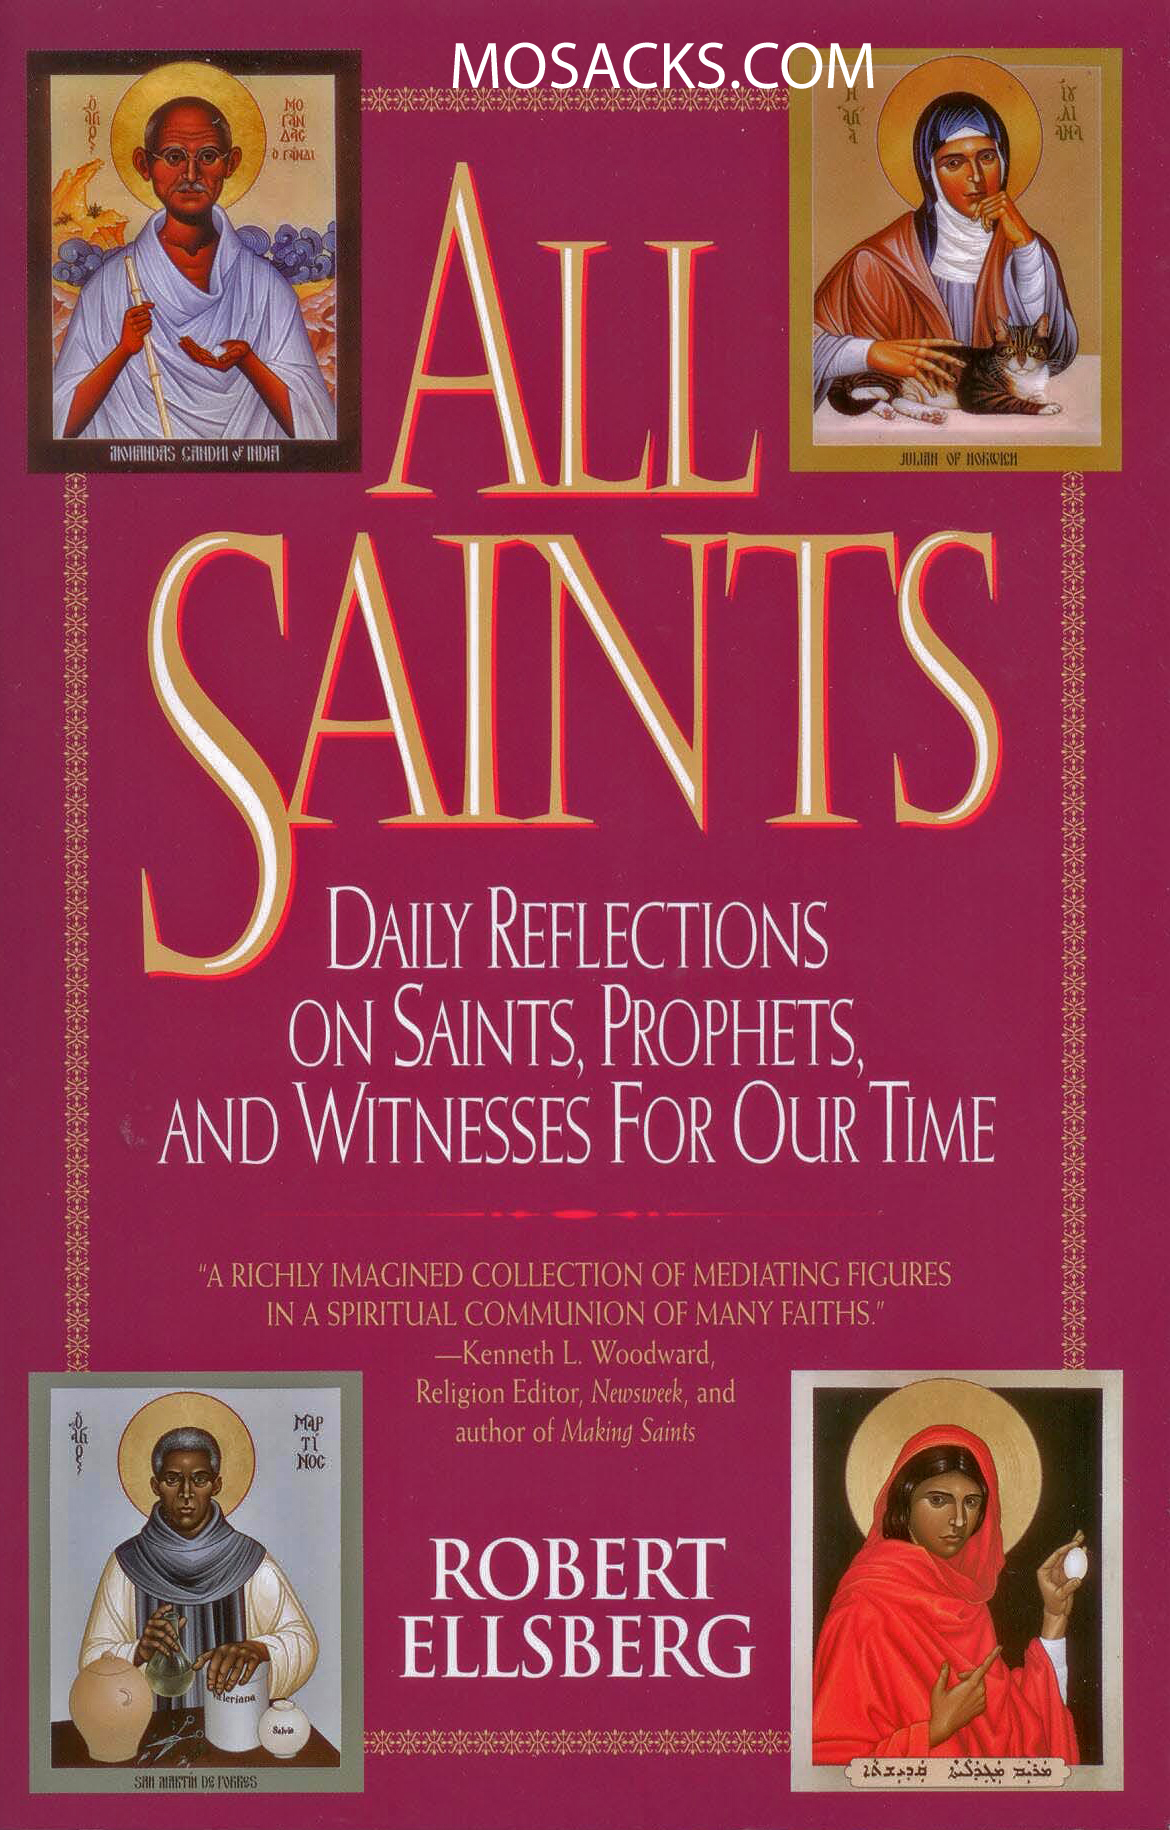 All Saints Daily Reflections by R. Ellsberg